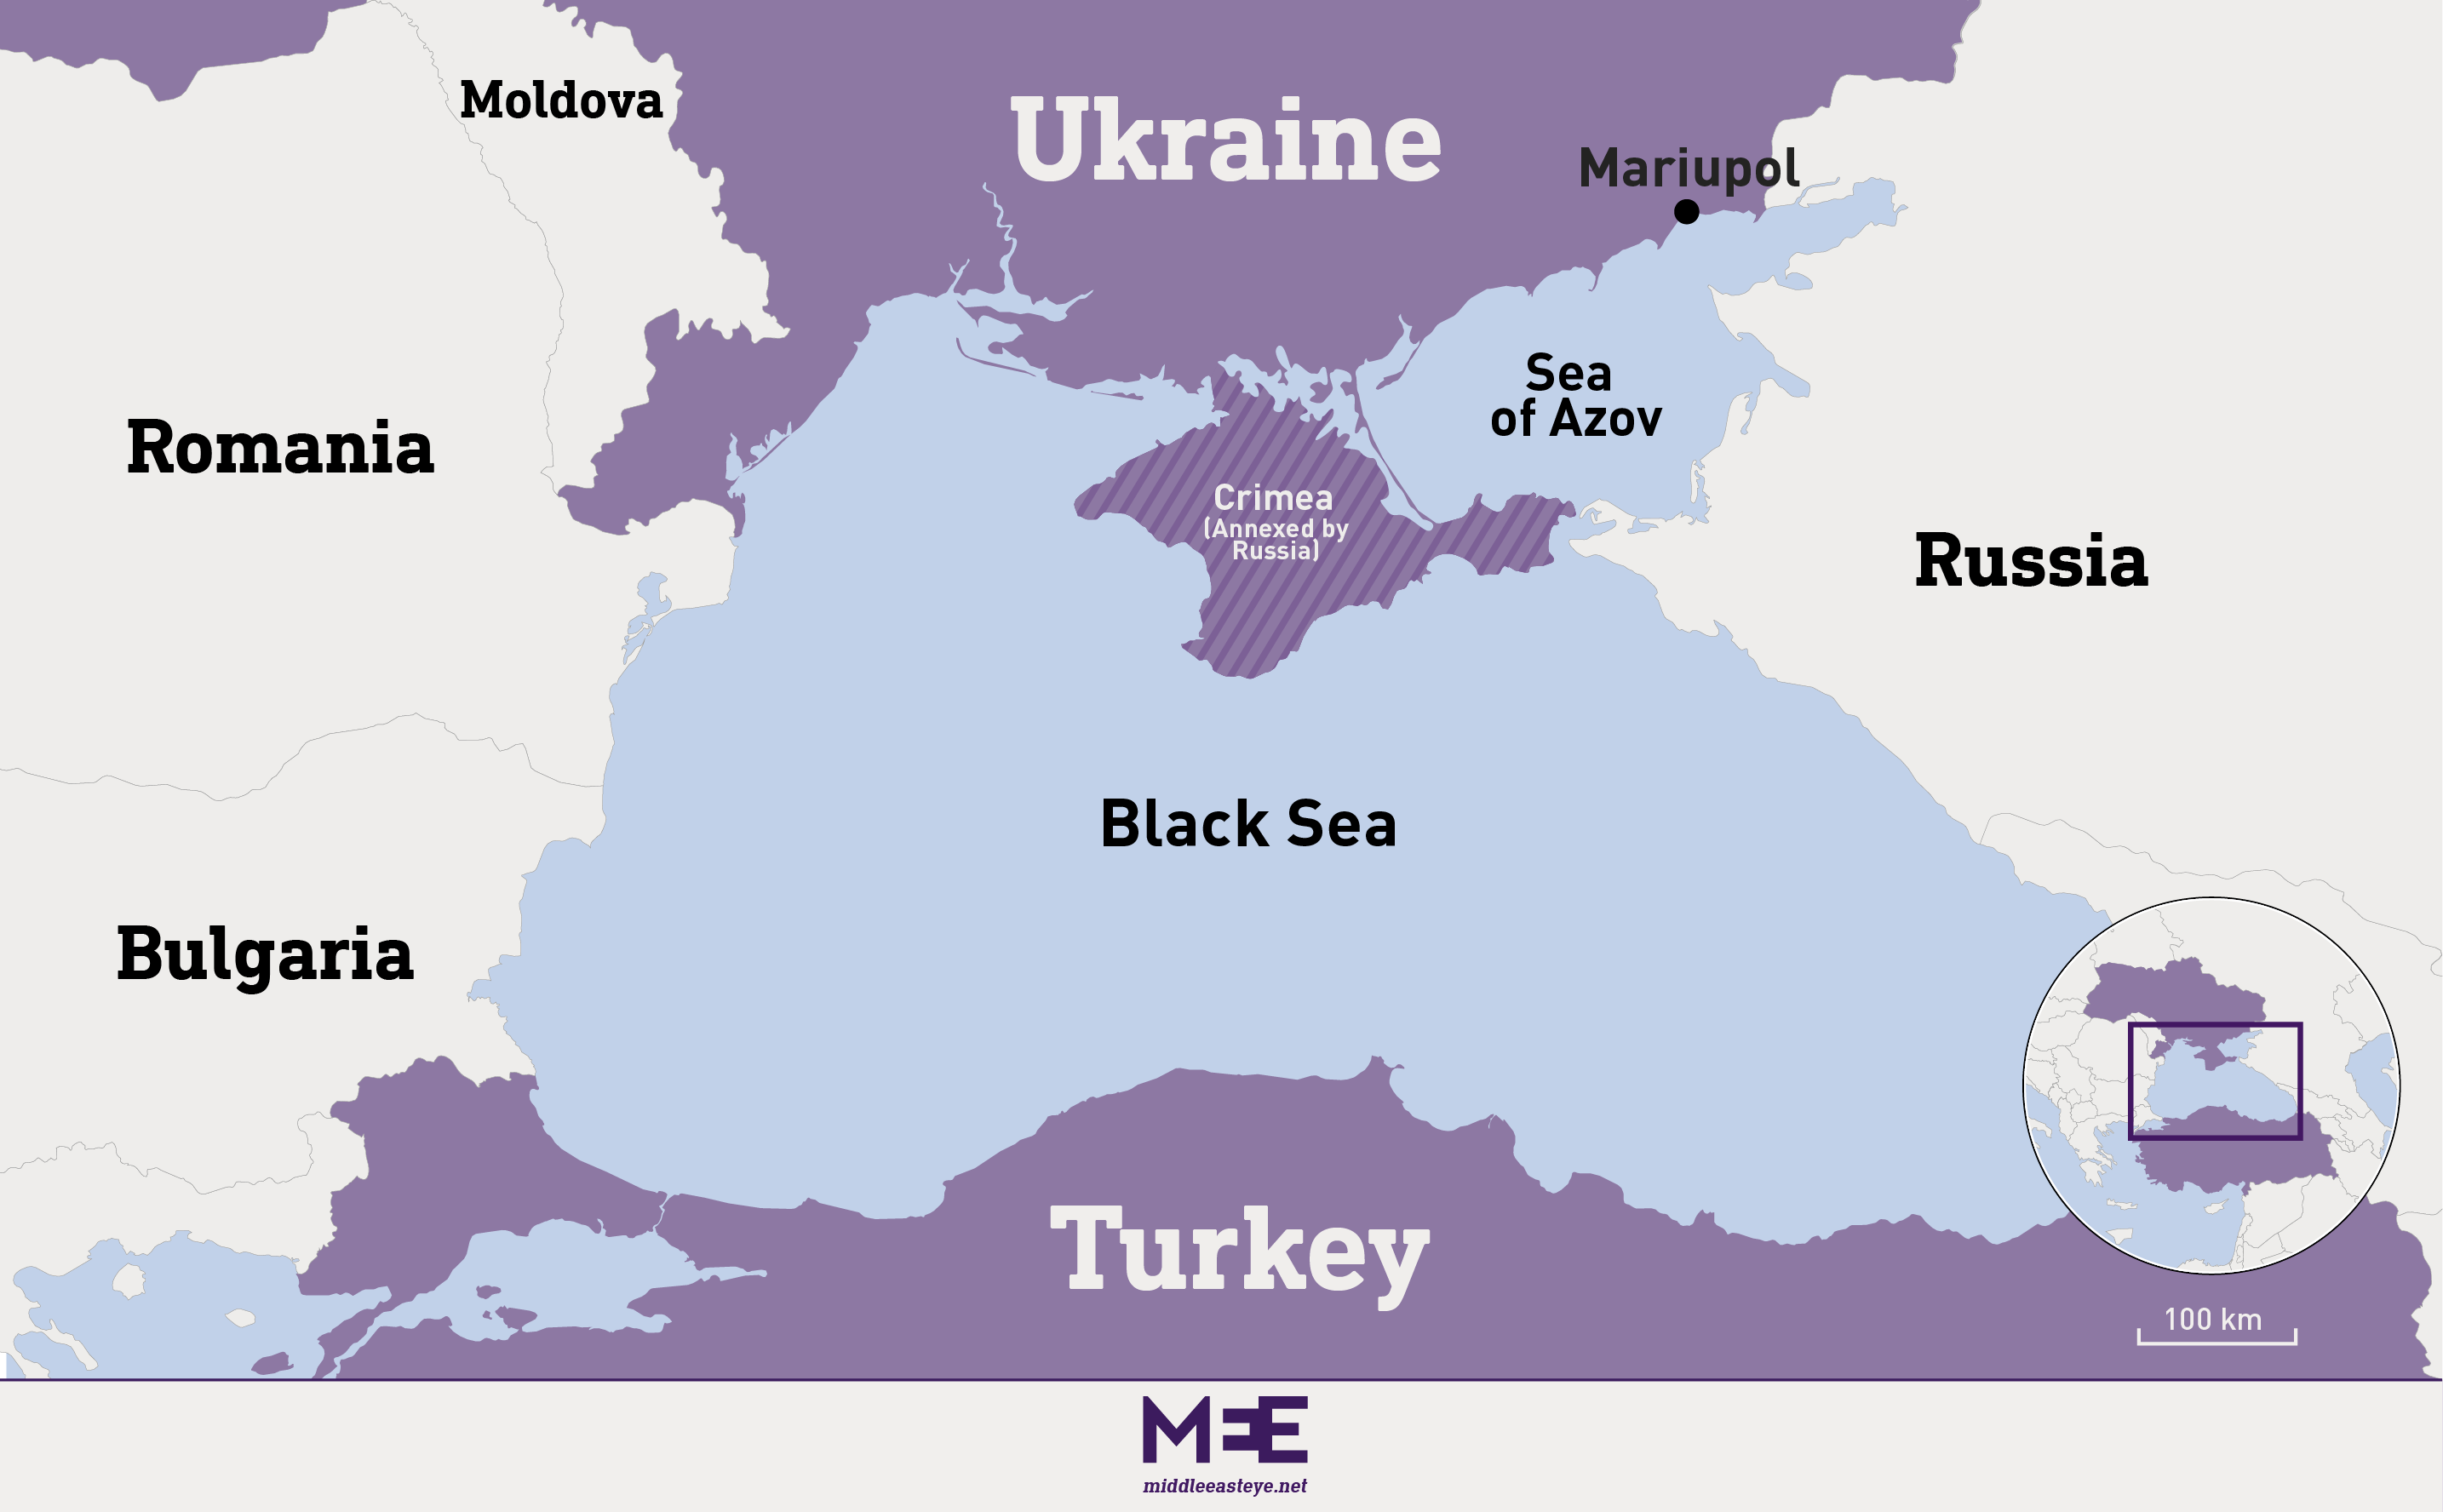  Mariupol is a strategically important city located between Russian-annexed Crimea and the separatist Donbas region